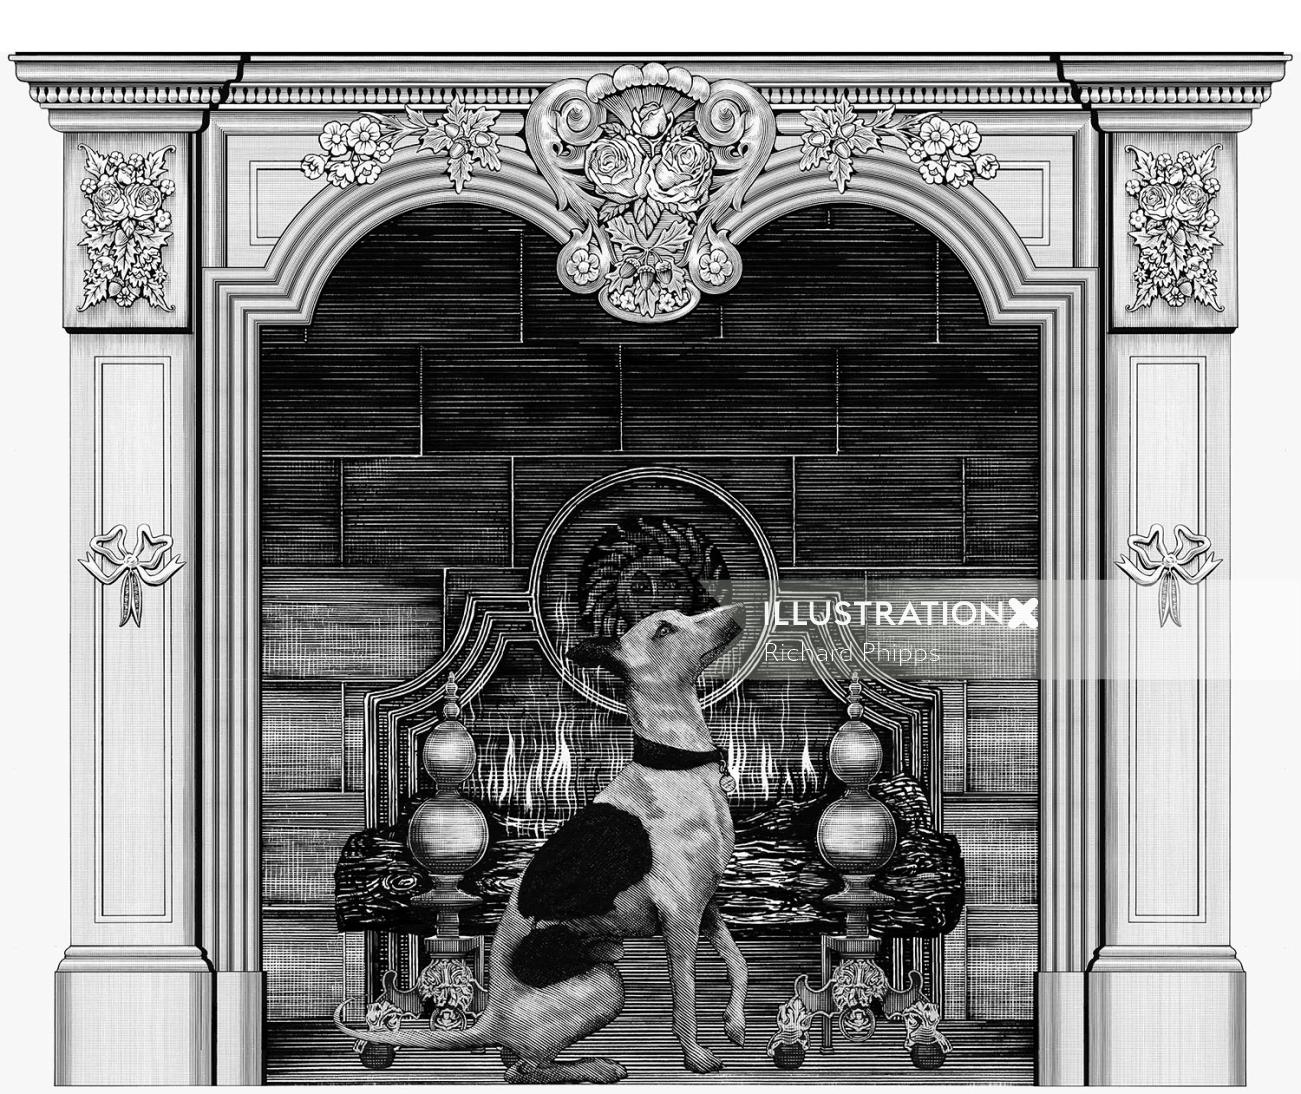 Trompe-l'il fireplace illustration in black and white